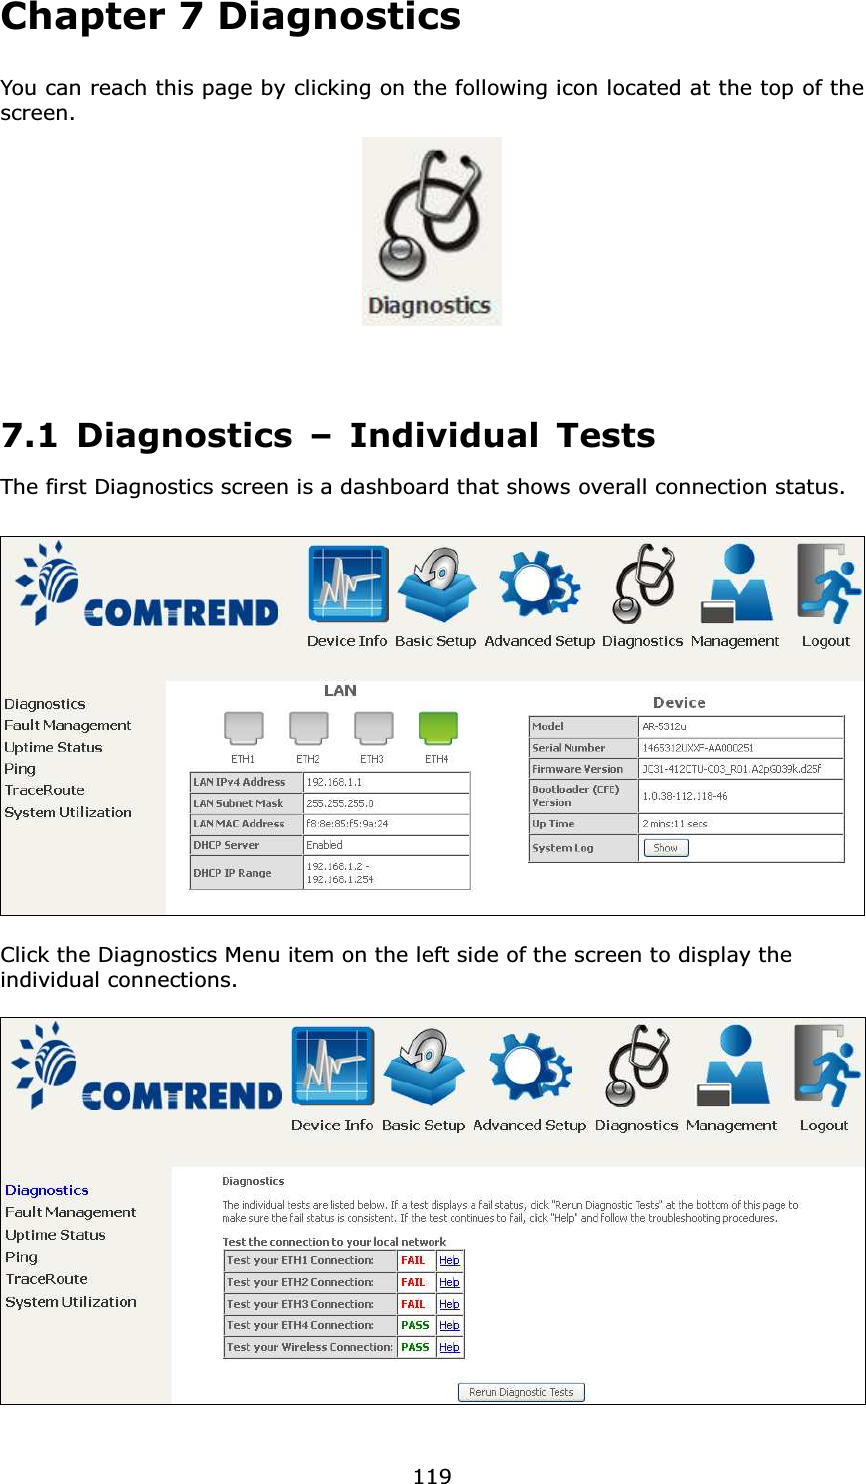  119Chapter 7 Diagnostics You can reach this page by clicking on the following icon located at the top of the screen.    7.1 Diagnostics – Individual Tests The first Diagnostics screen is a dashboard that shows overall connection status.      Click the Diagnostics Menu item on the left side of the screen to display the individual connections.    